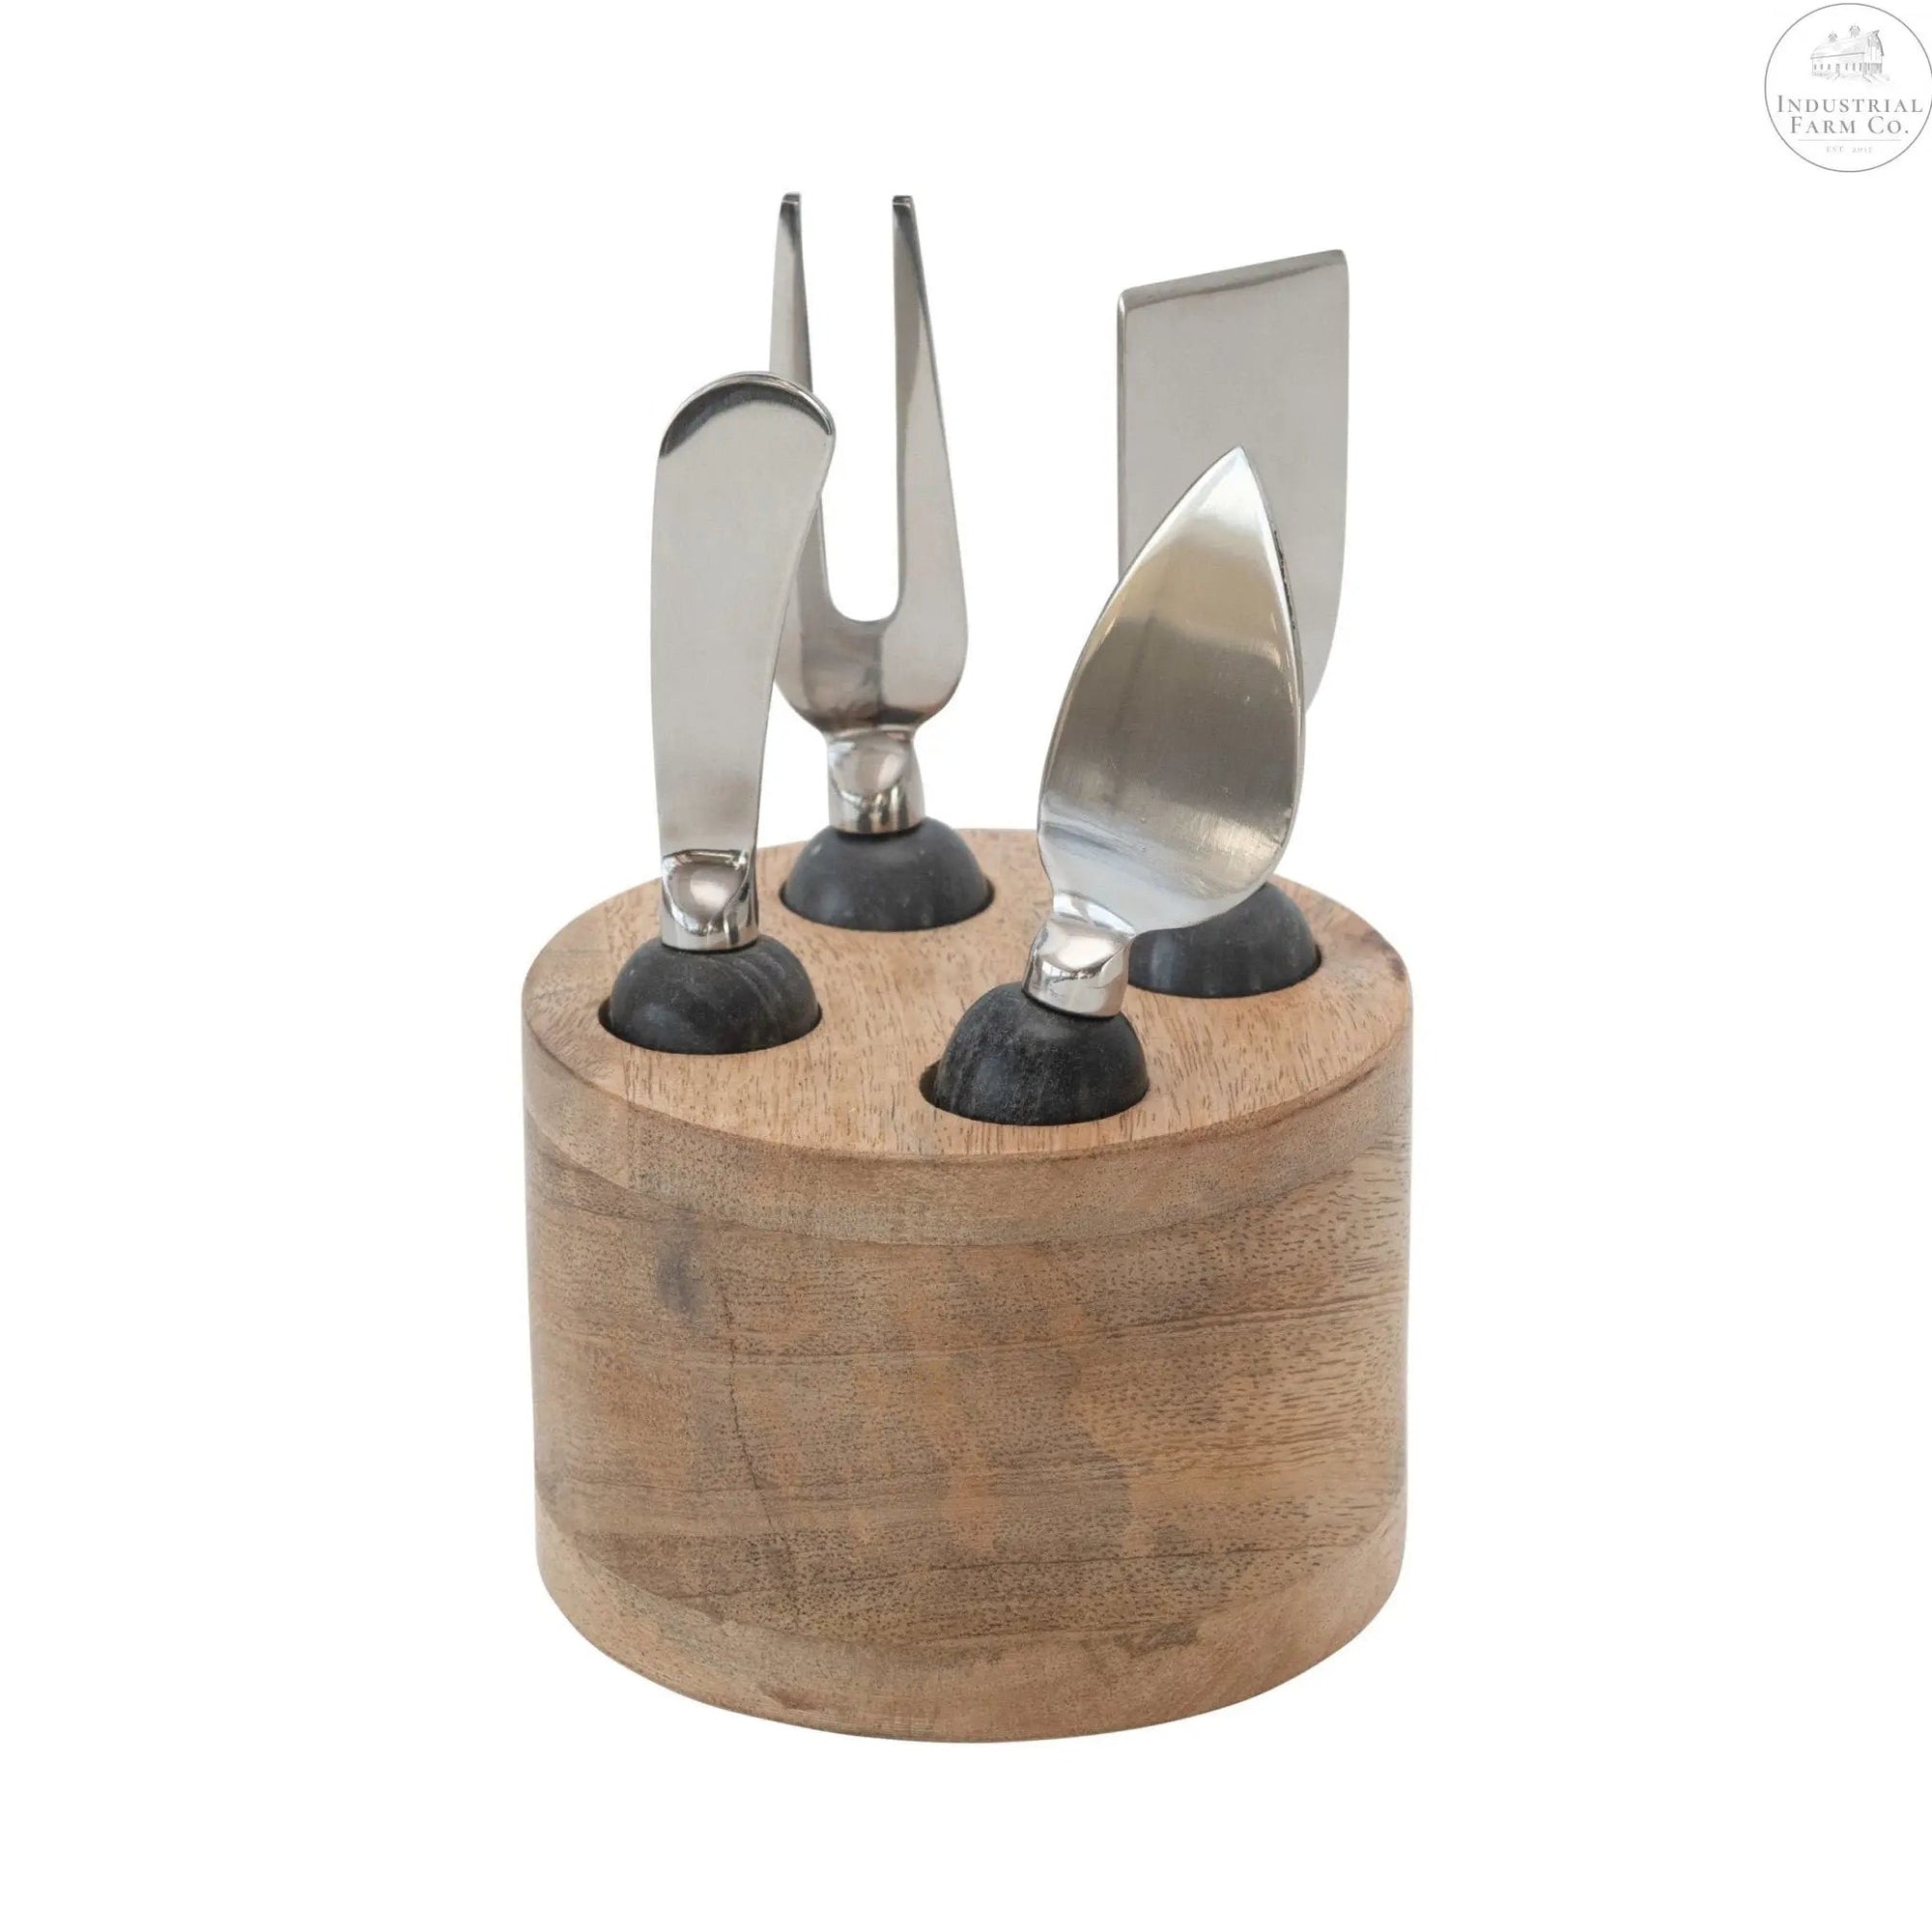 Mango Wood and Marble Cheese Serving Set  Default Title   | Industrial Farm Co